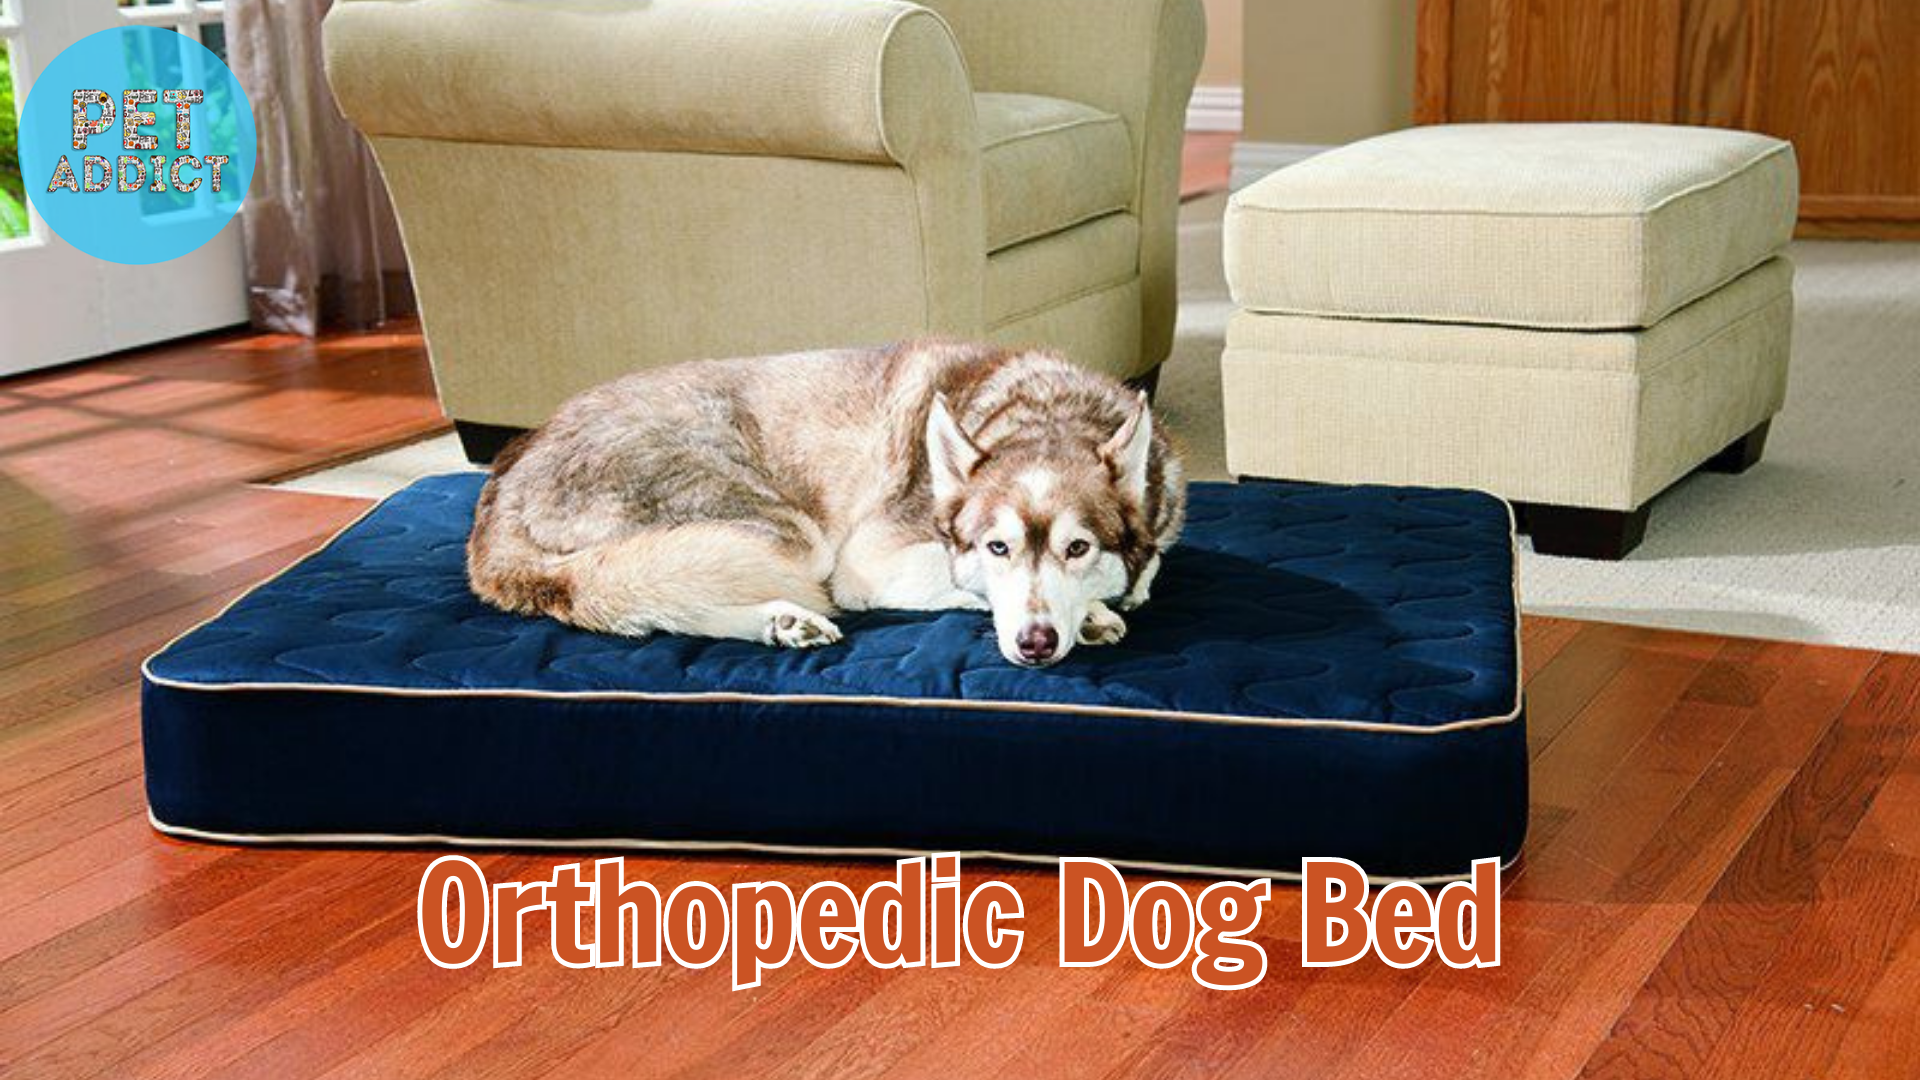 Orthopedic Dog Bed: A Comfortable Resting Place for Your Dog